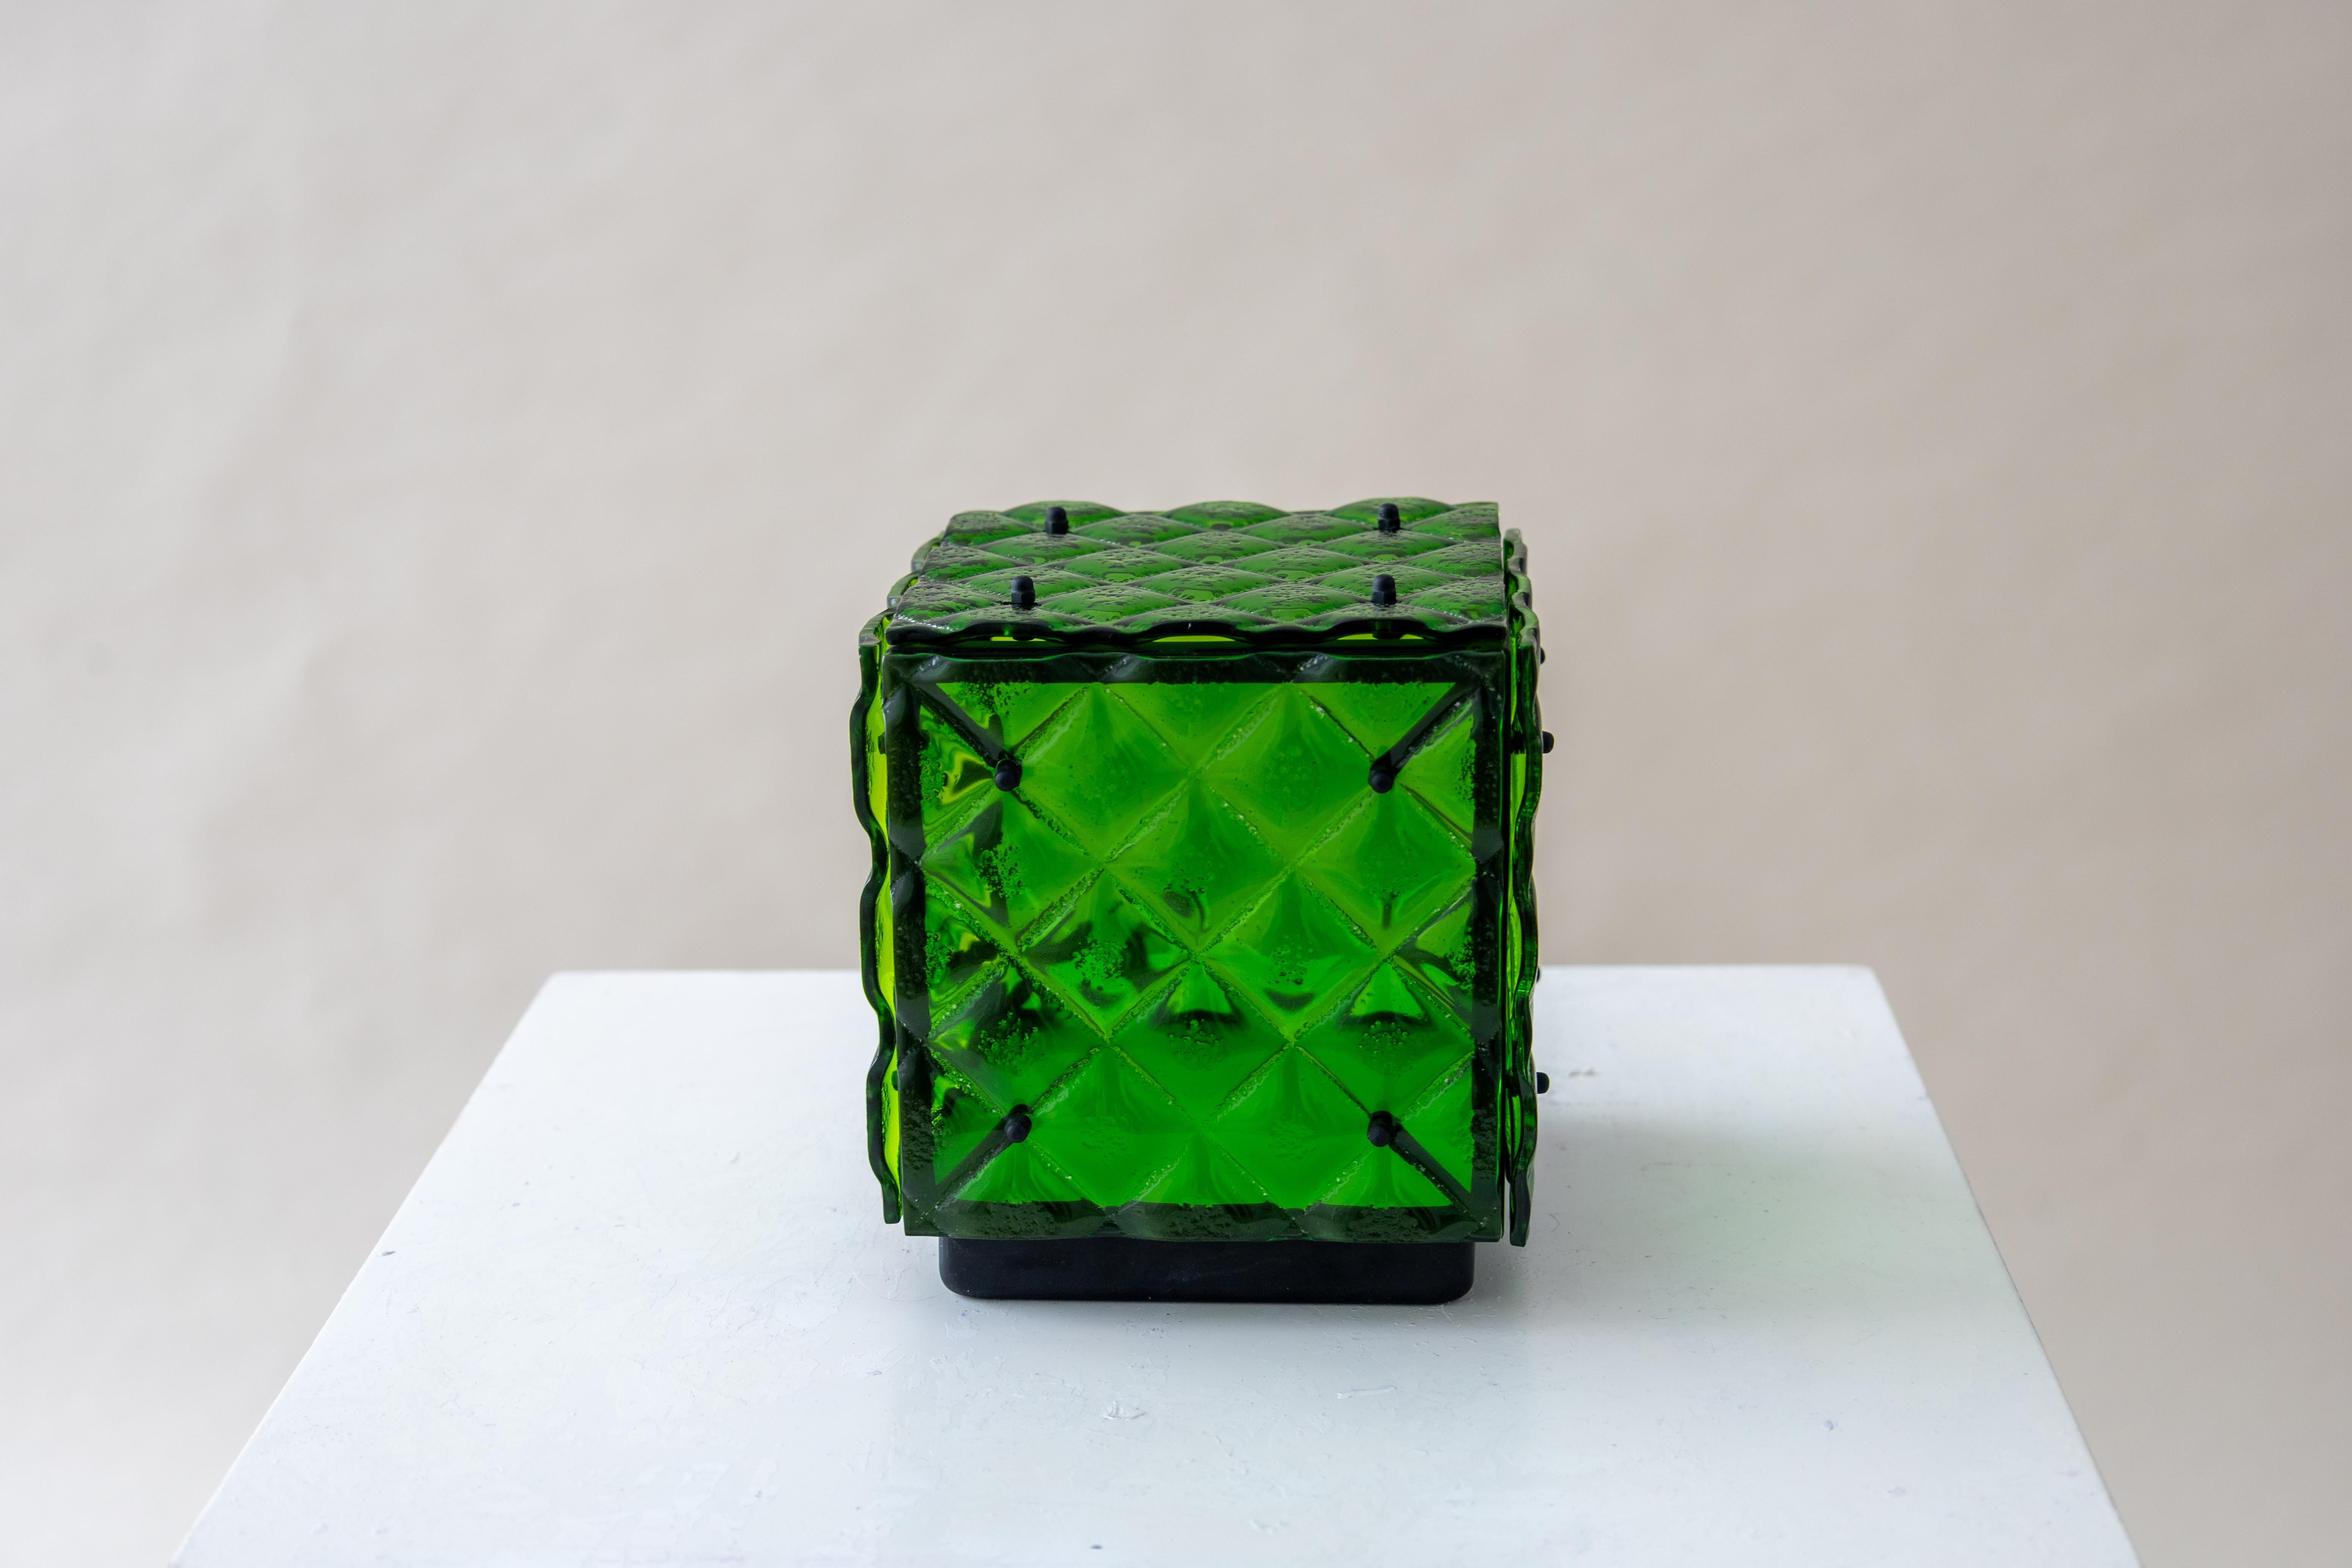 Spanish Glass Cube Lamp Green Ambient Light Artisanal Fused Glass Contemporary Design For Sale